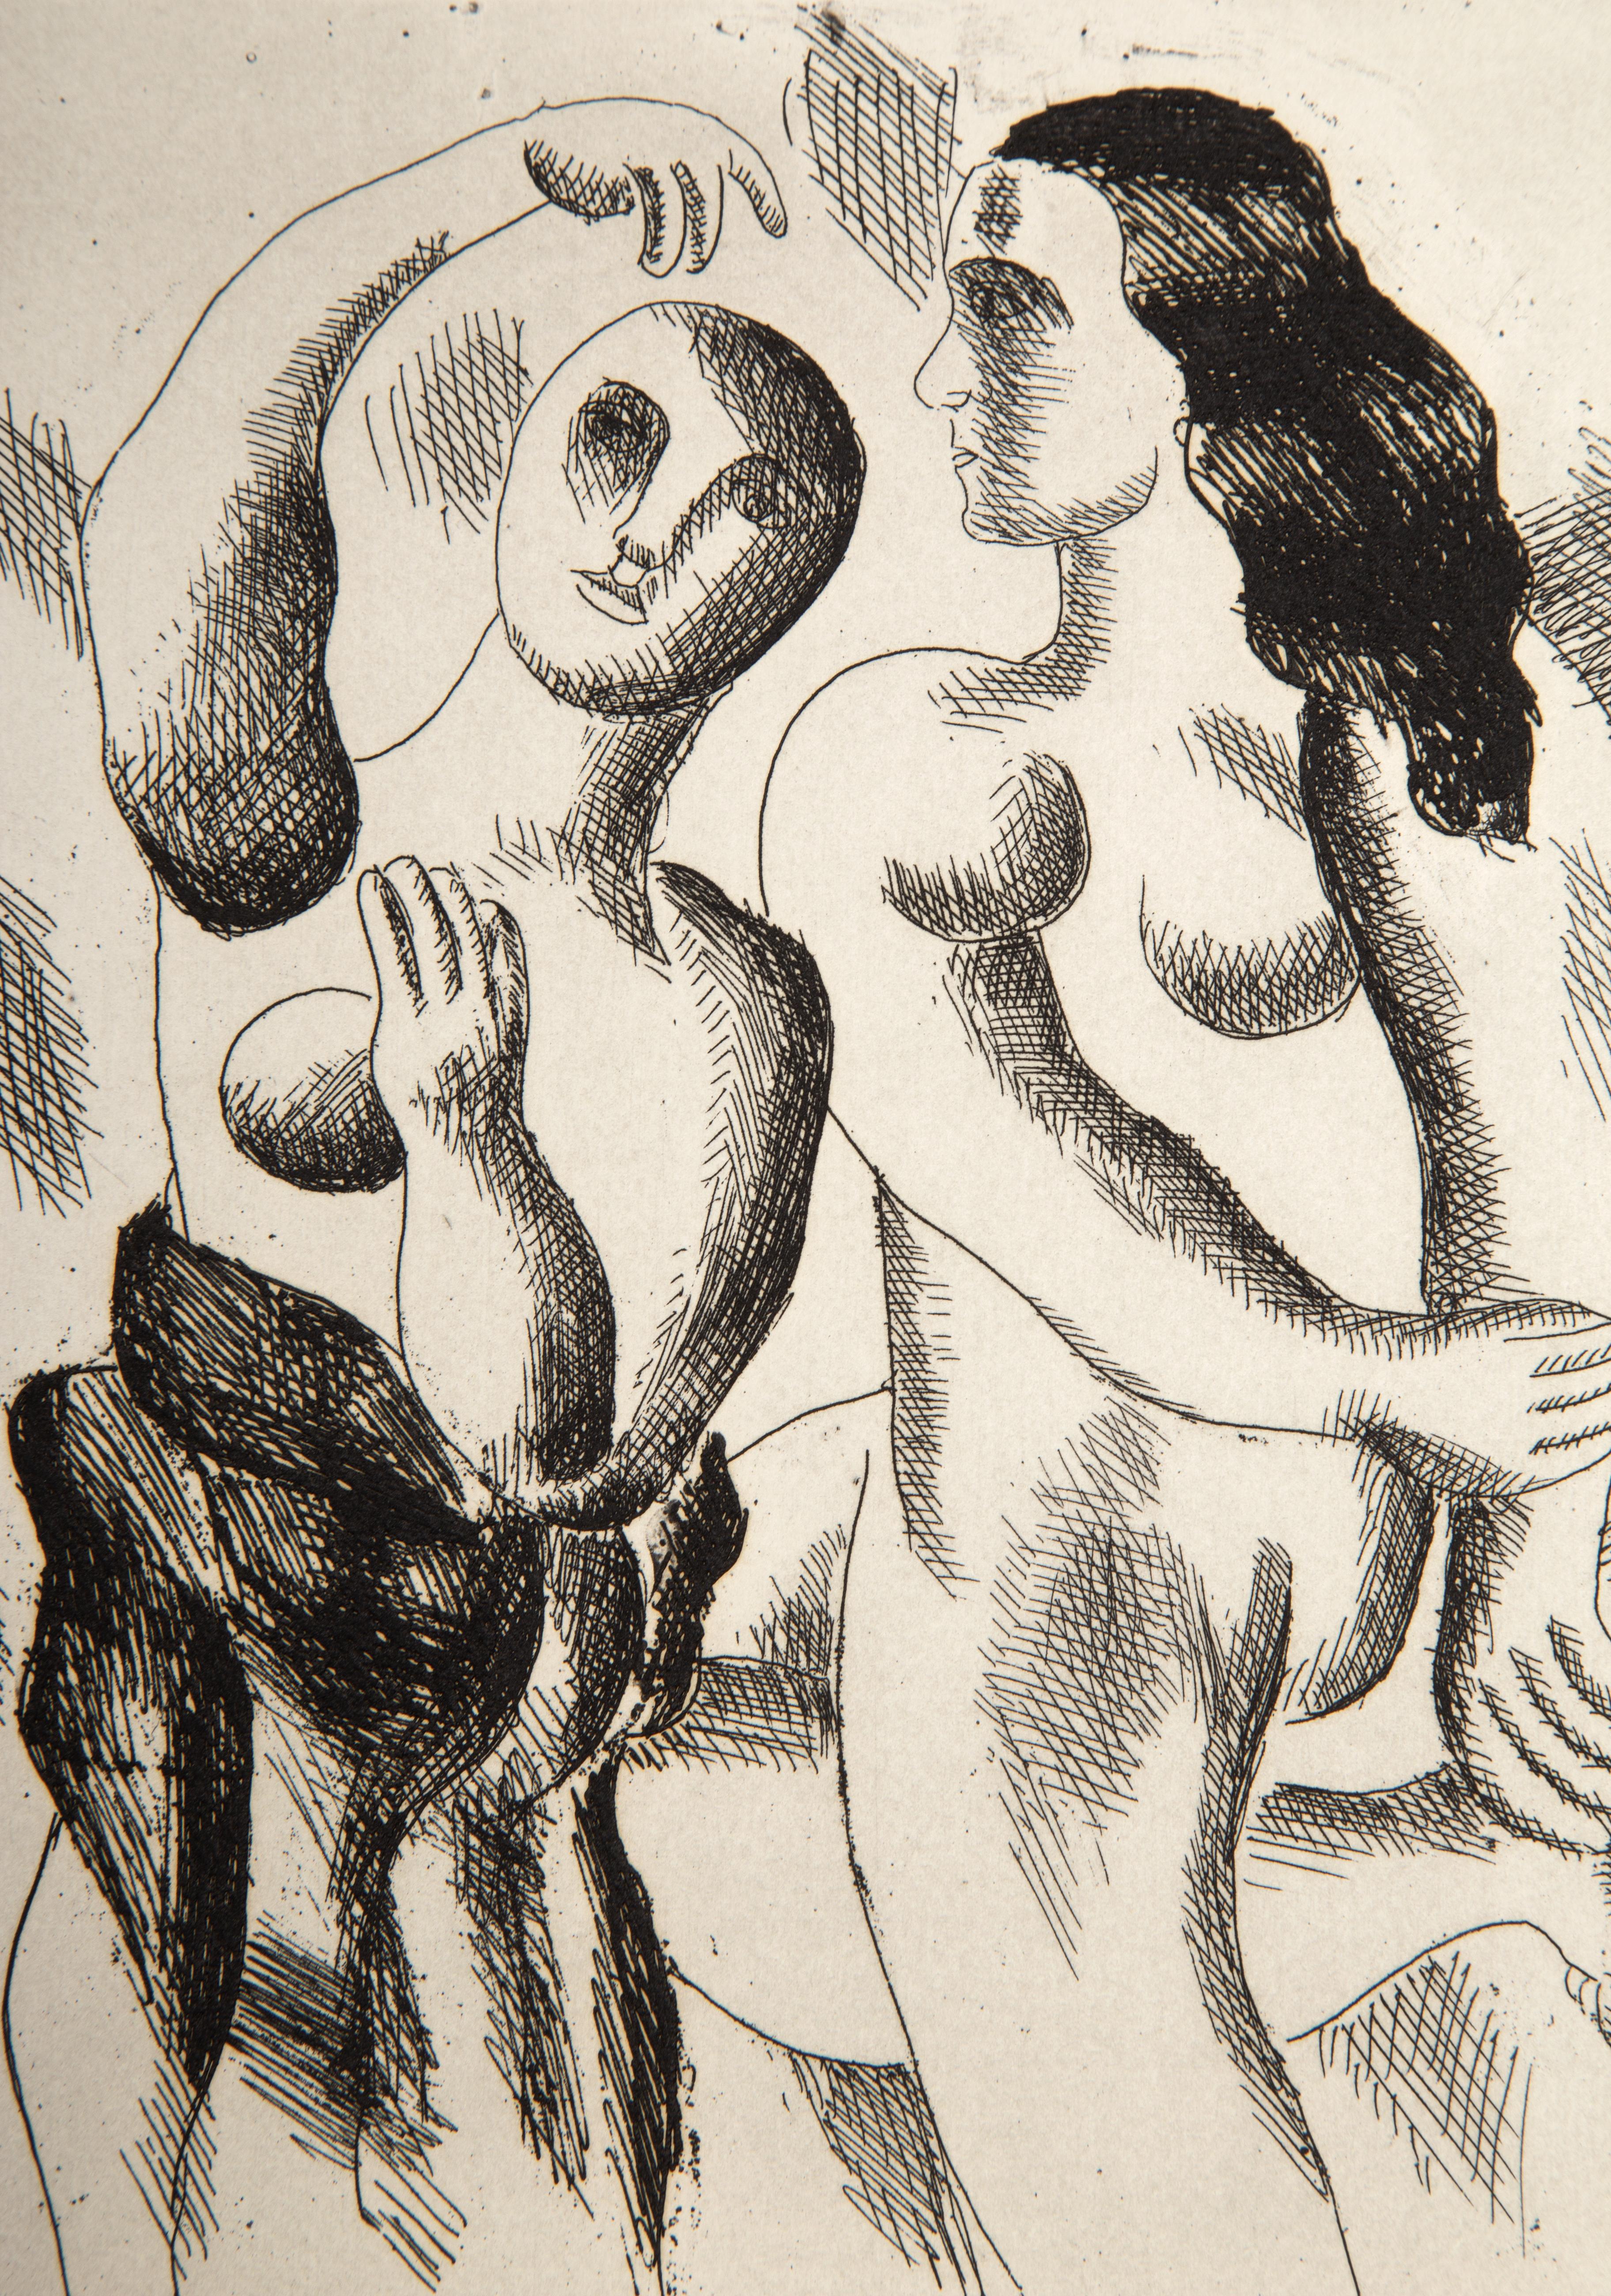 Deux nus Dansant
Fernand Leger, French (1881–1955)
Date: circa 1932
Drypoint Etching
Image Size: 8.5 x 7.5 inches
Size: 14.75 x 11 in. (37.47 x 27.94 cm)
From the collection of the late Larry Saphire.